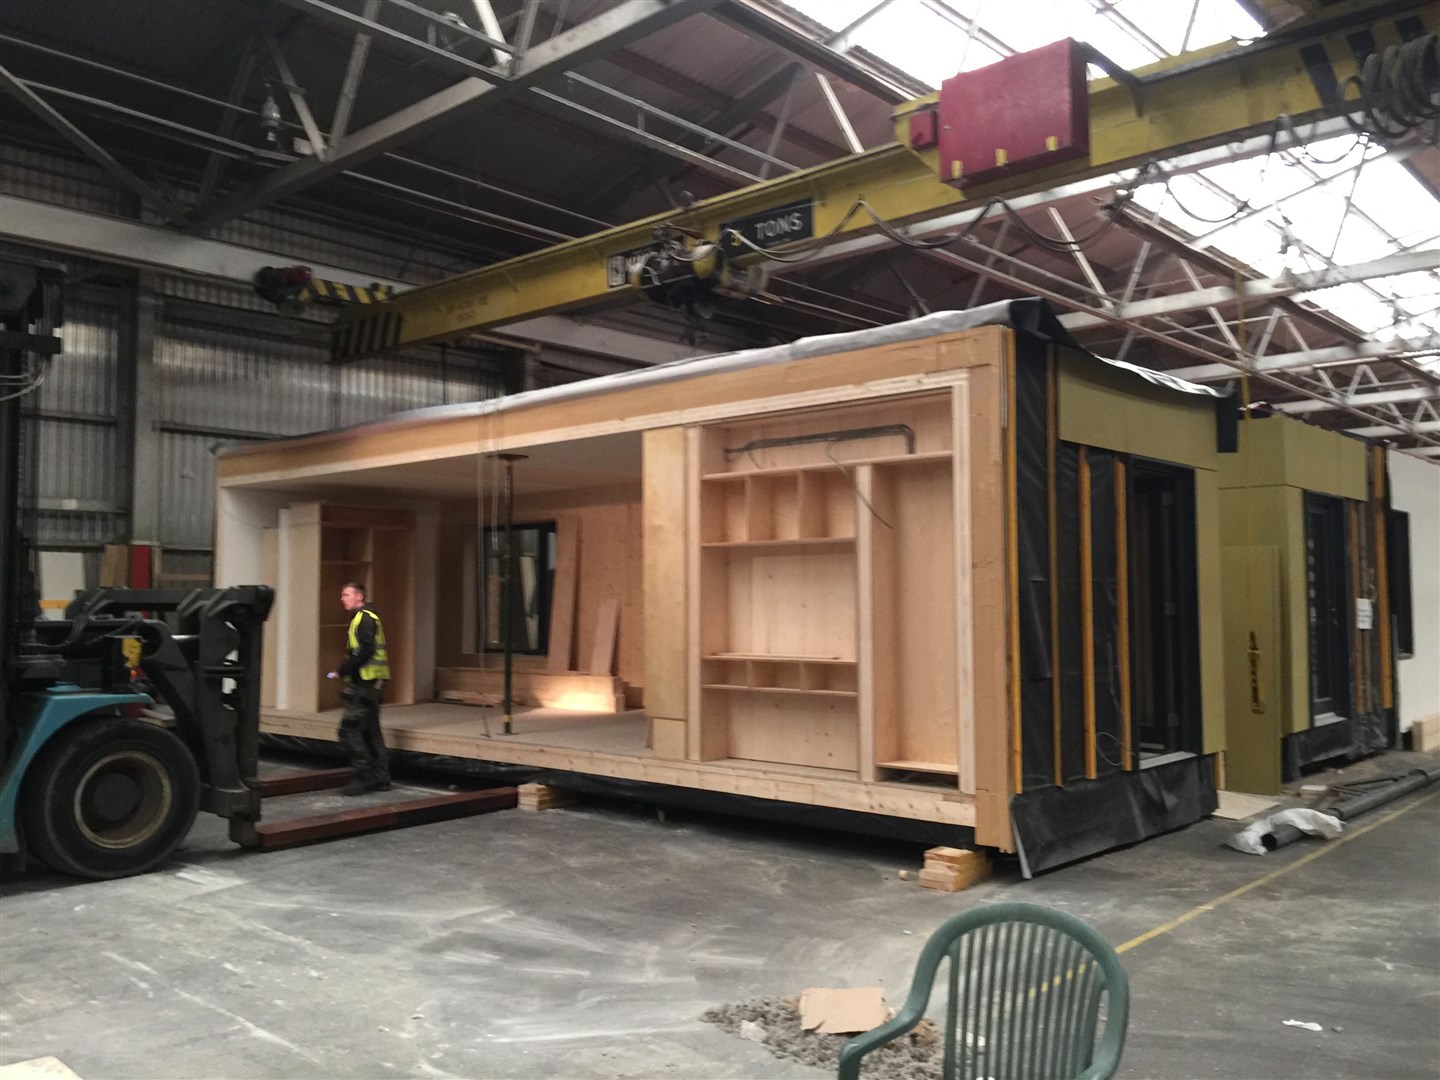 In December 2018, the firm incorporated Invergordon-based modular buildings specialist Carbon Dynamic into its operations.